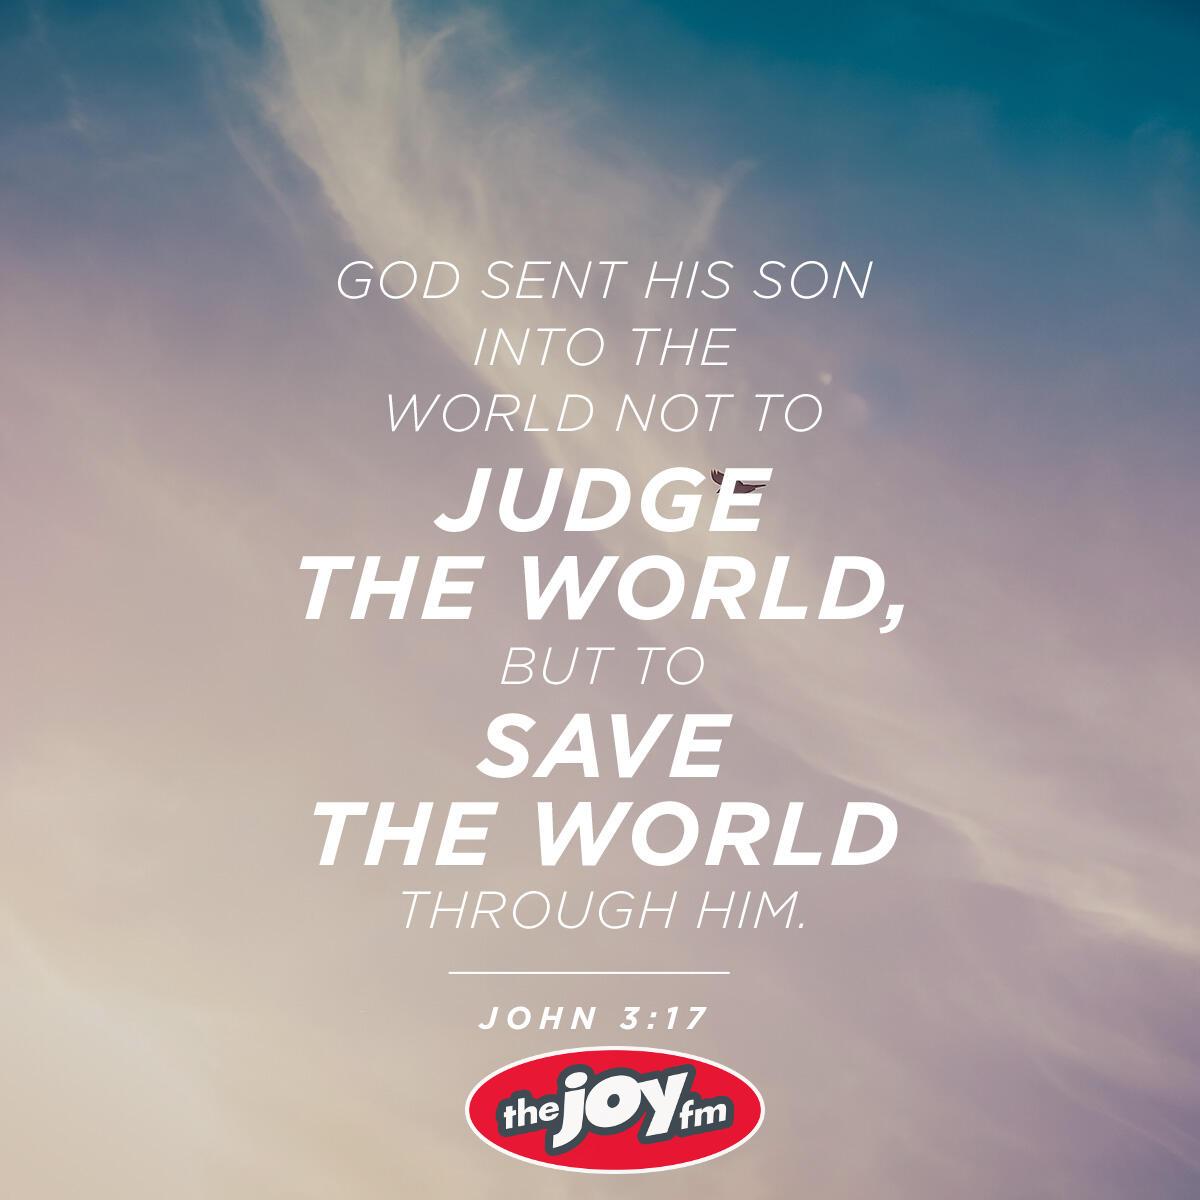 John 3:17 - Verse of the Day